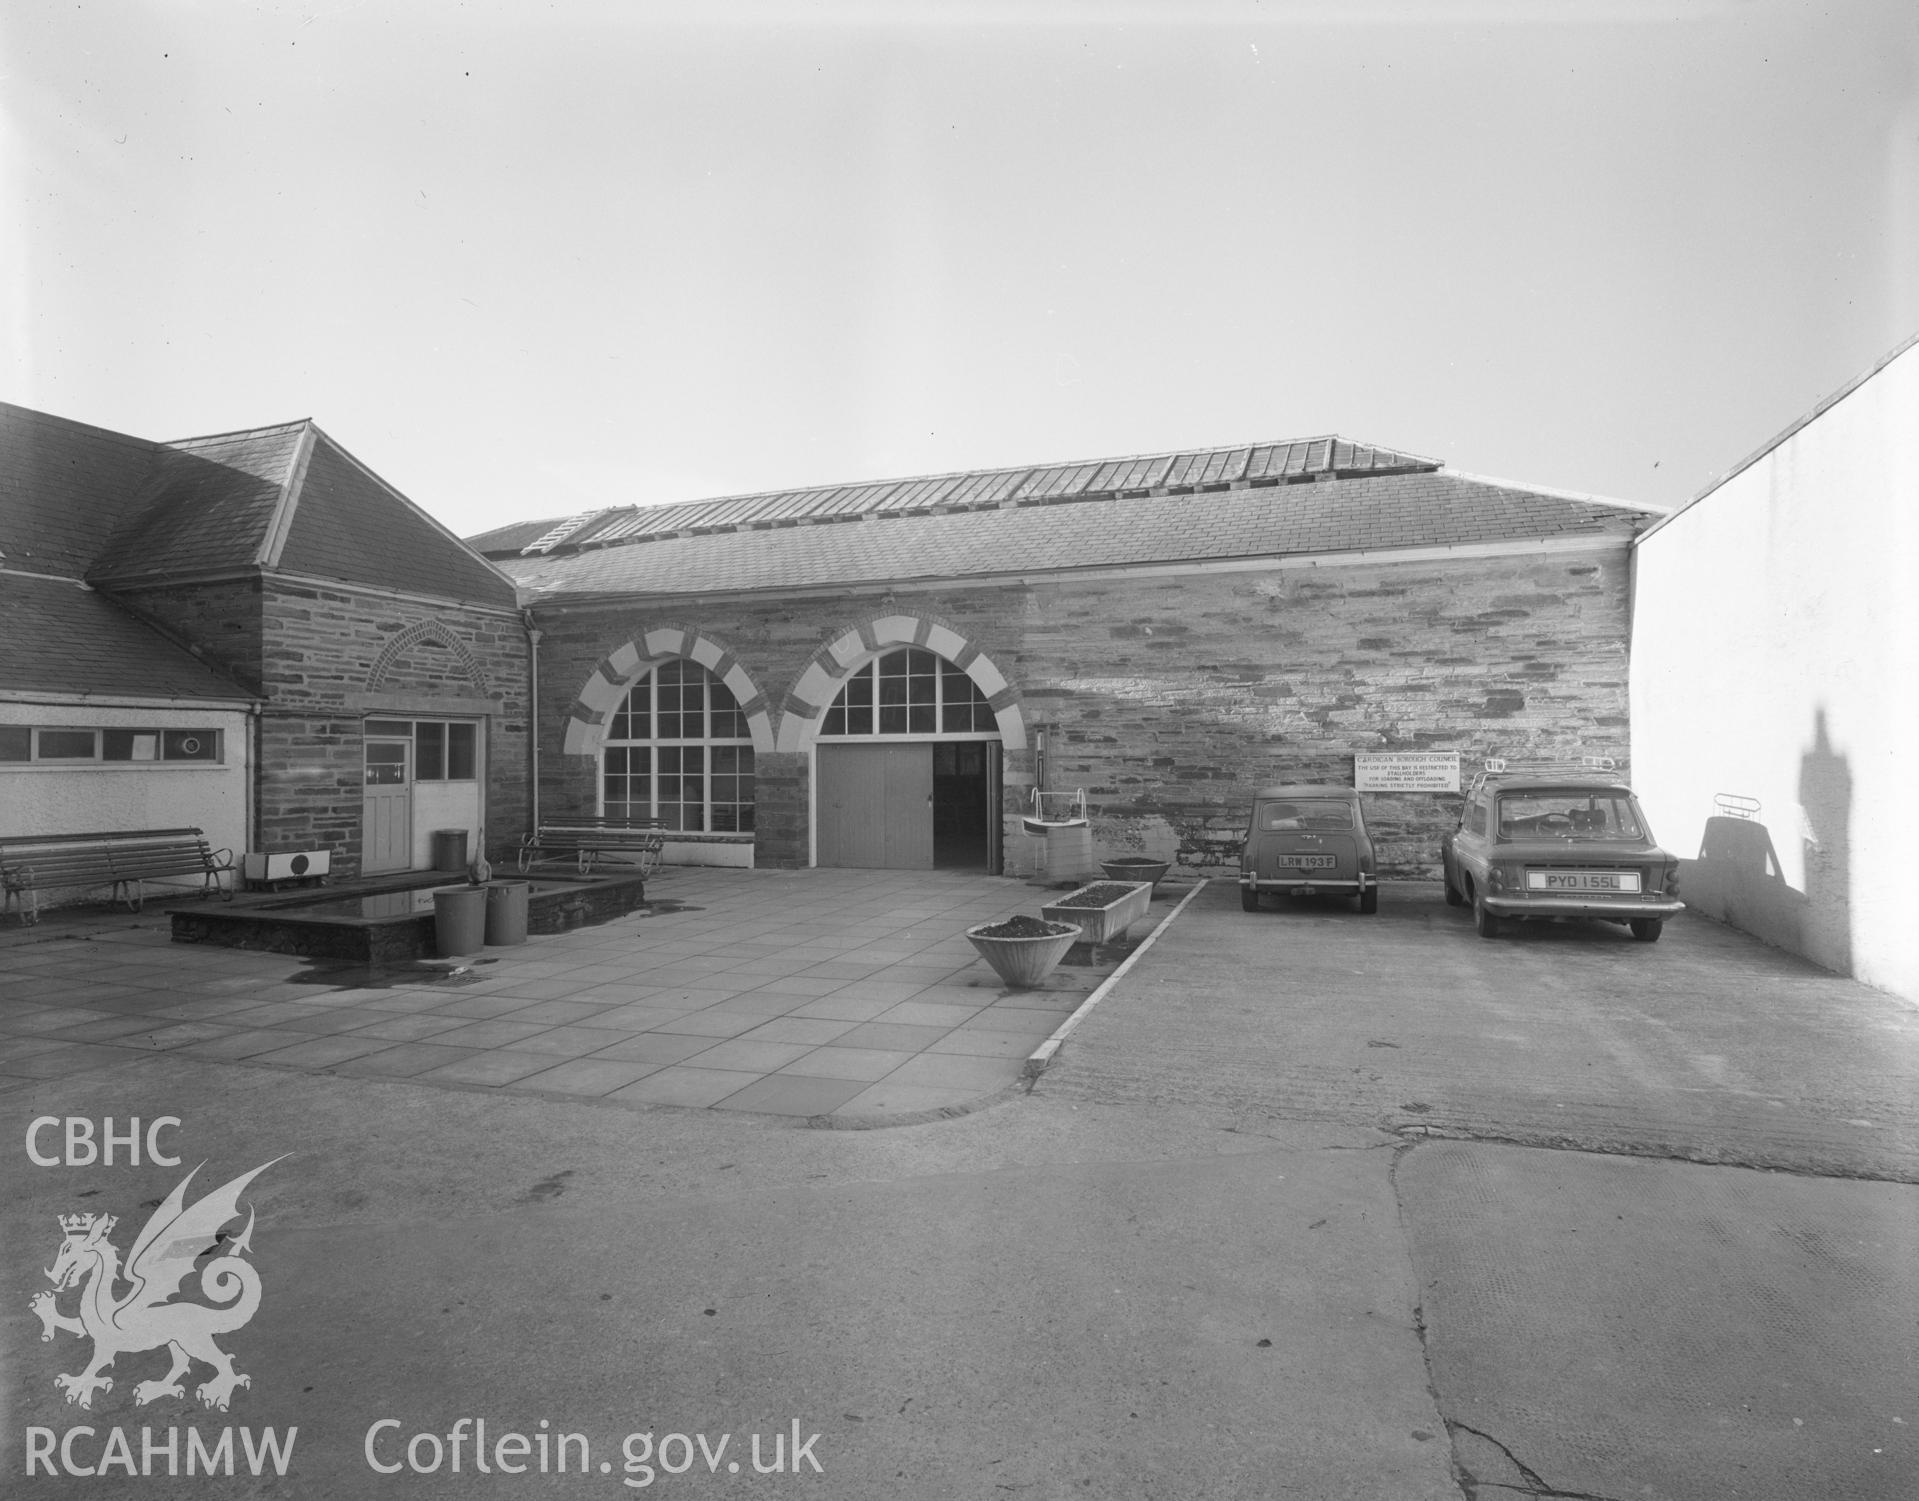 Black and white acetate negative showing exterior view of Cardigan Market Hall.